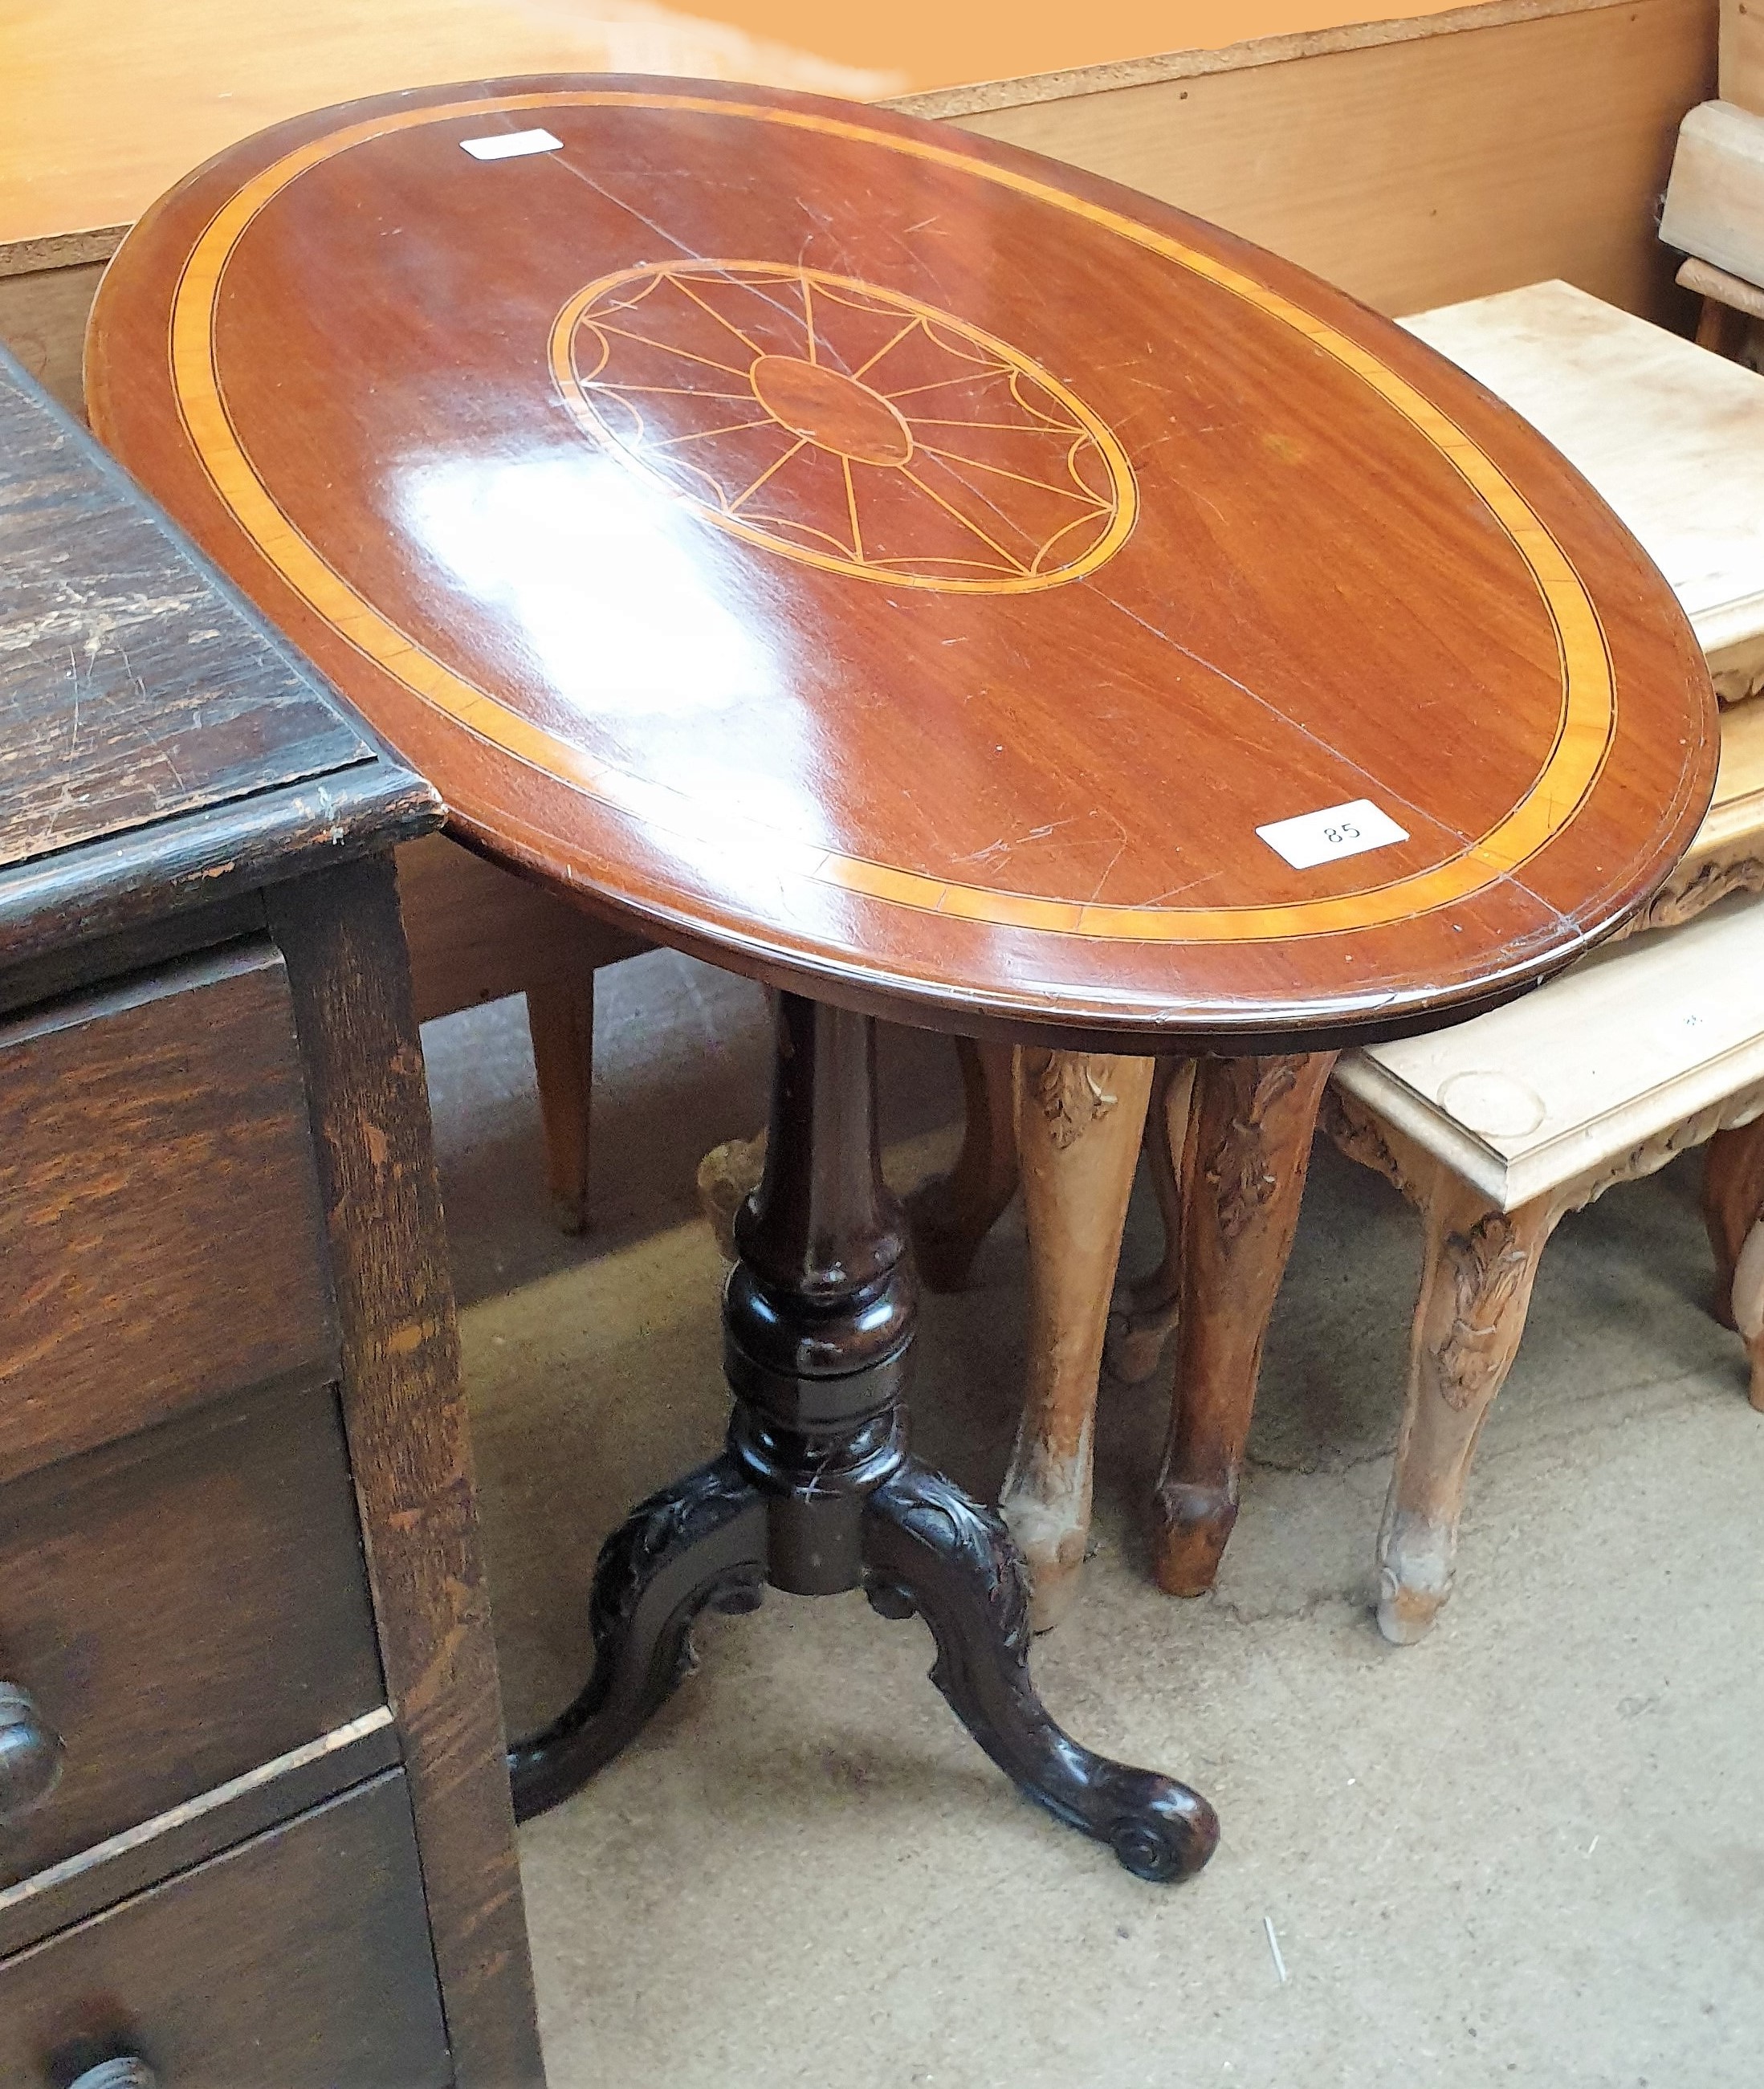 An Edwardian mahogany occasional table with an inlaid oval top on a tapering column and three leaf